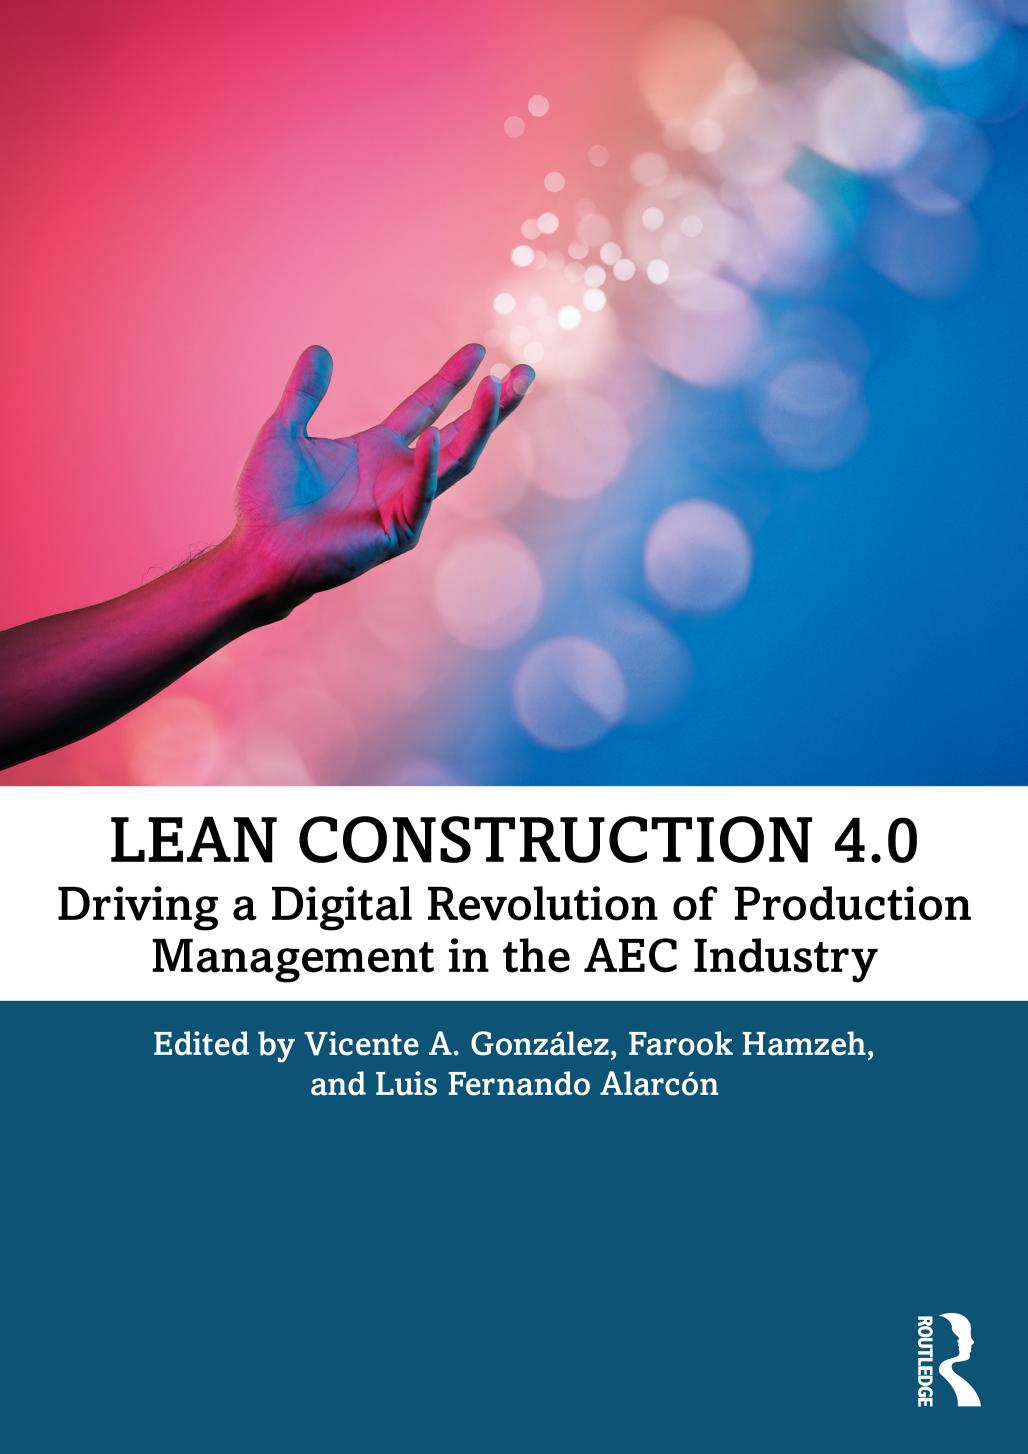 Lean Construction 4.0; Driving a Digital Revolution of Production Management in the AEC Industry